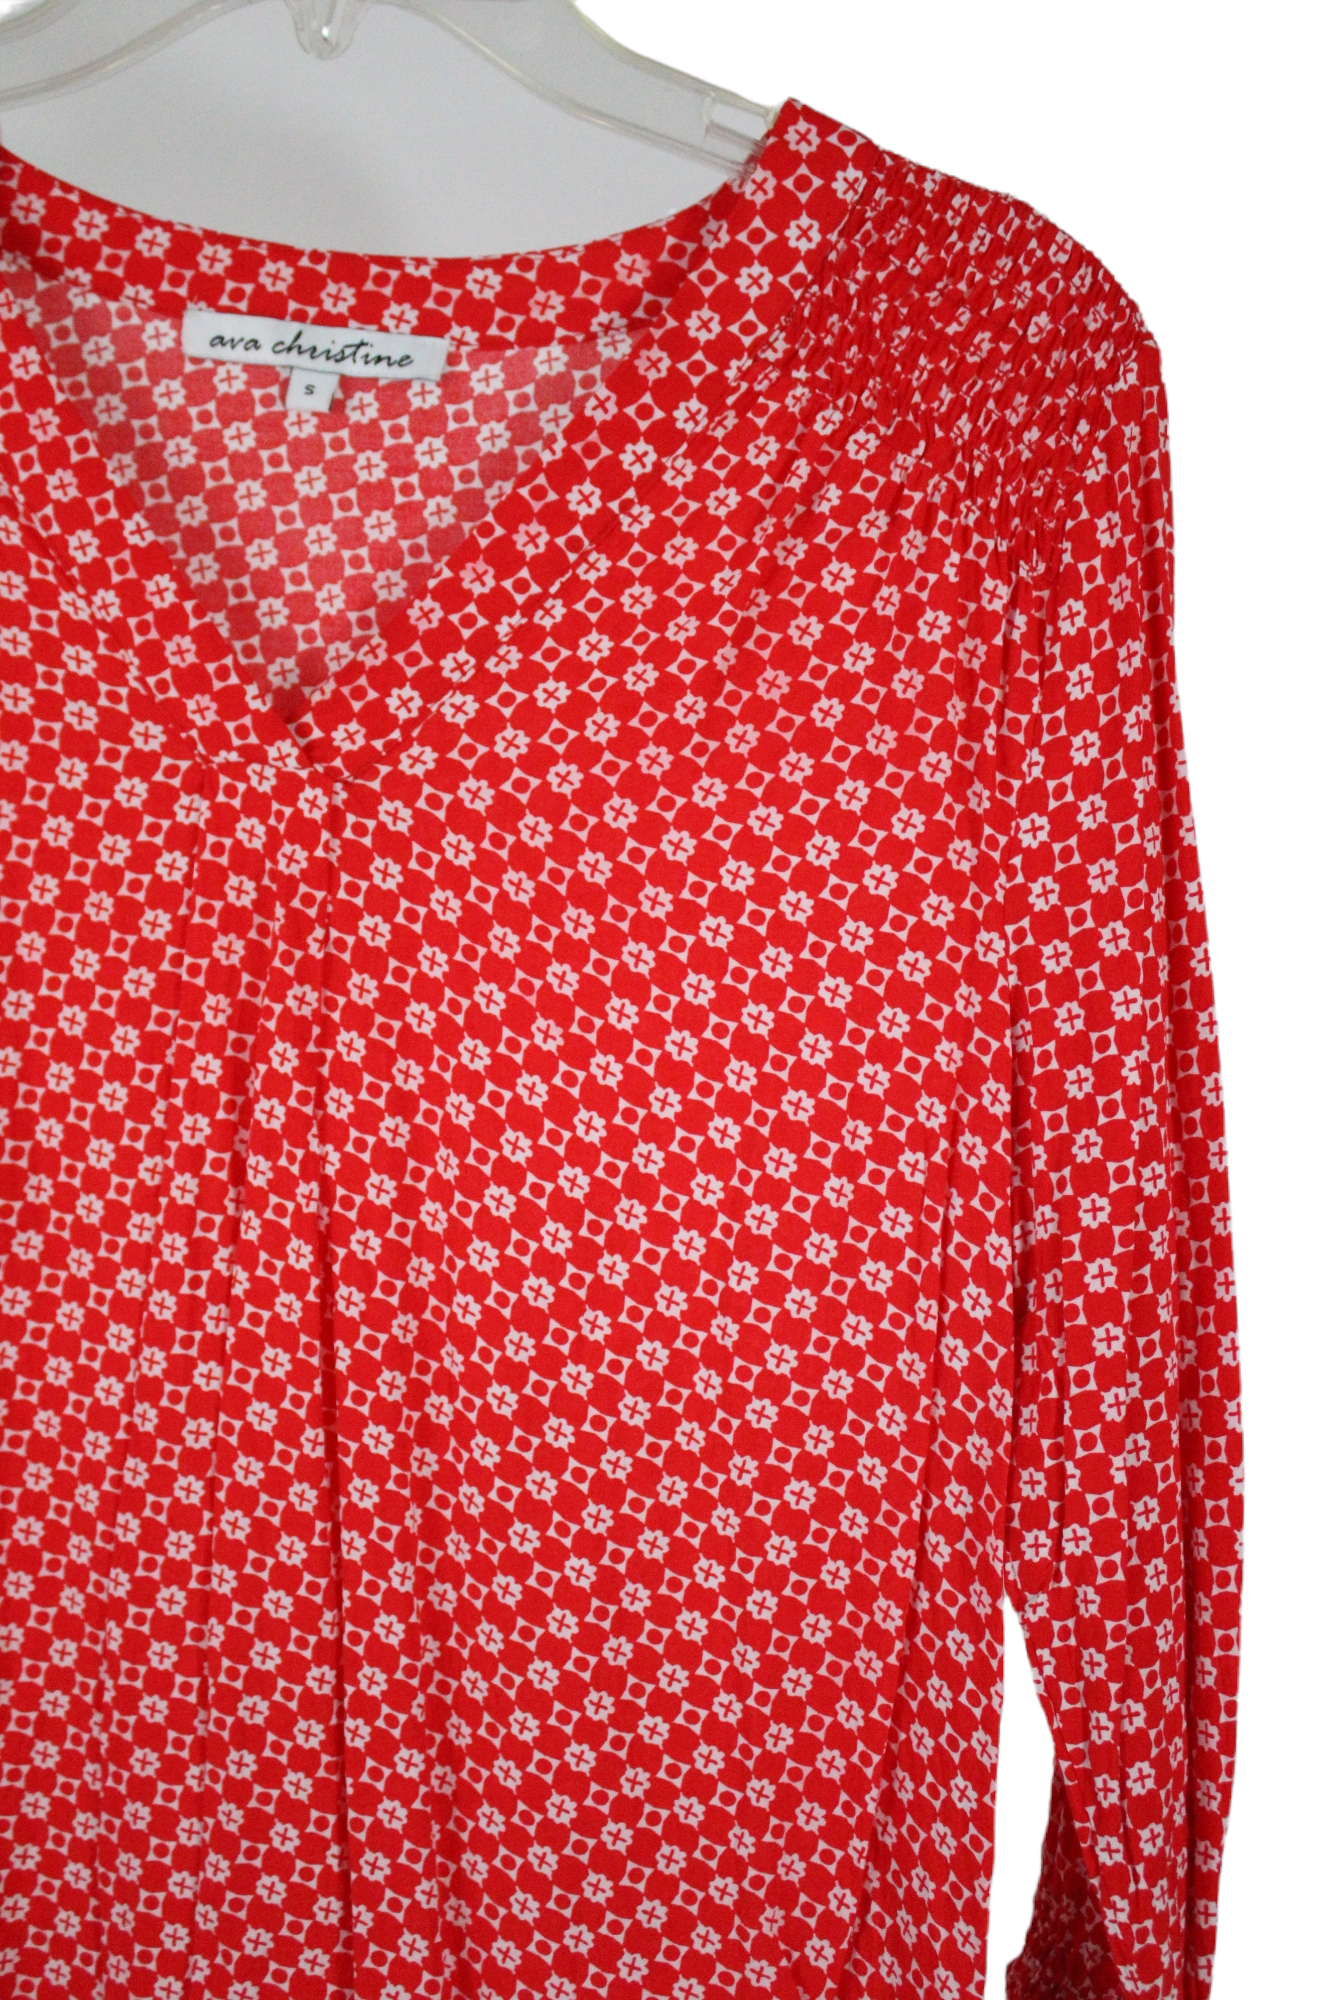 Ava Christine Red Patterned Blouse | S